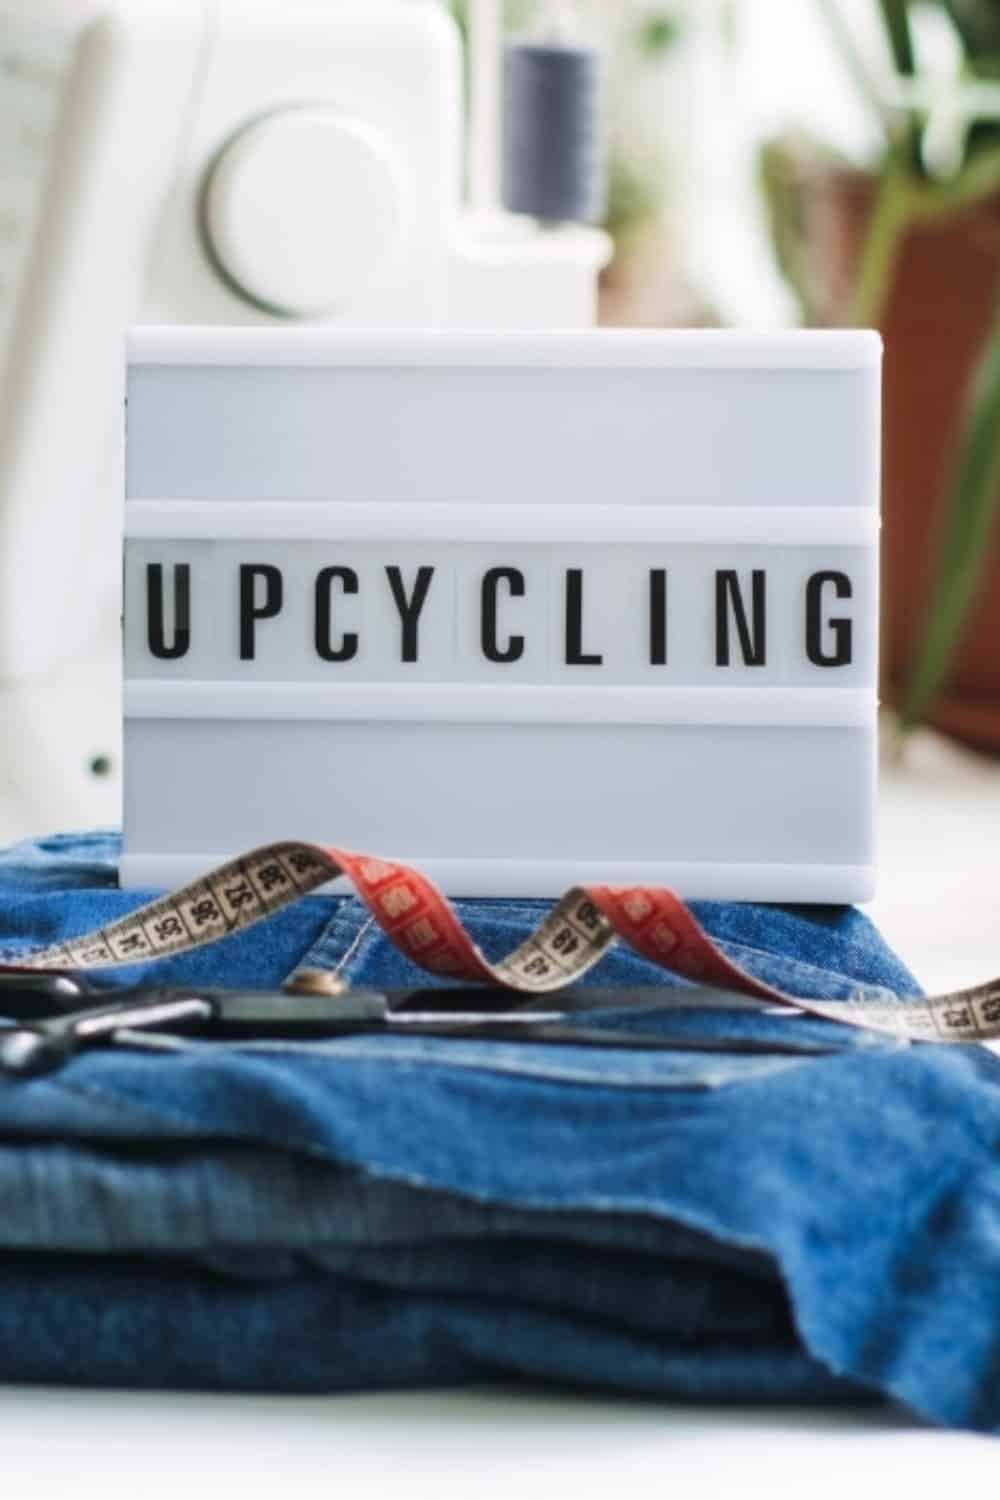 Zero waste fashion brands and designers are embracing the concept of circularity. But what is upcycled clothing and what are the benefits of upcycling… Image by Irynakhabliuk via Canva Pro #whatisupcycledclothing #whatisupcycledfashion #whatarethebenefitsofupcycledclothing #upcyclingvsrecycling #upcyclingvsdowncycling #sustainablejungle